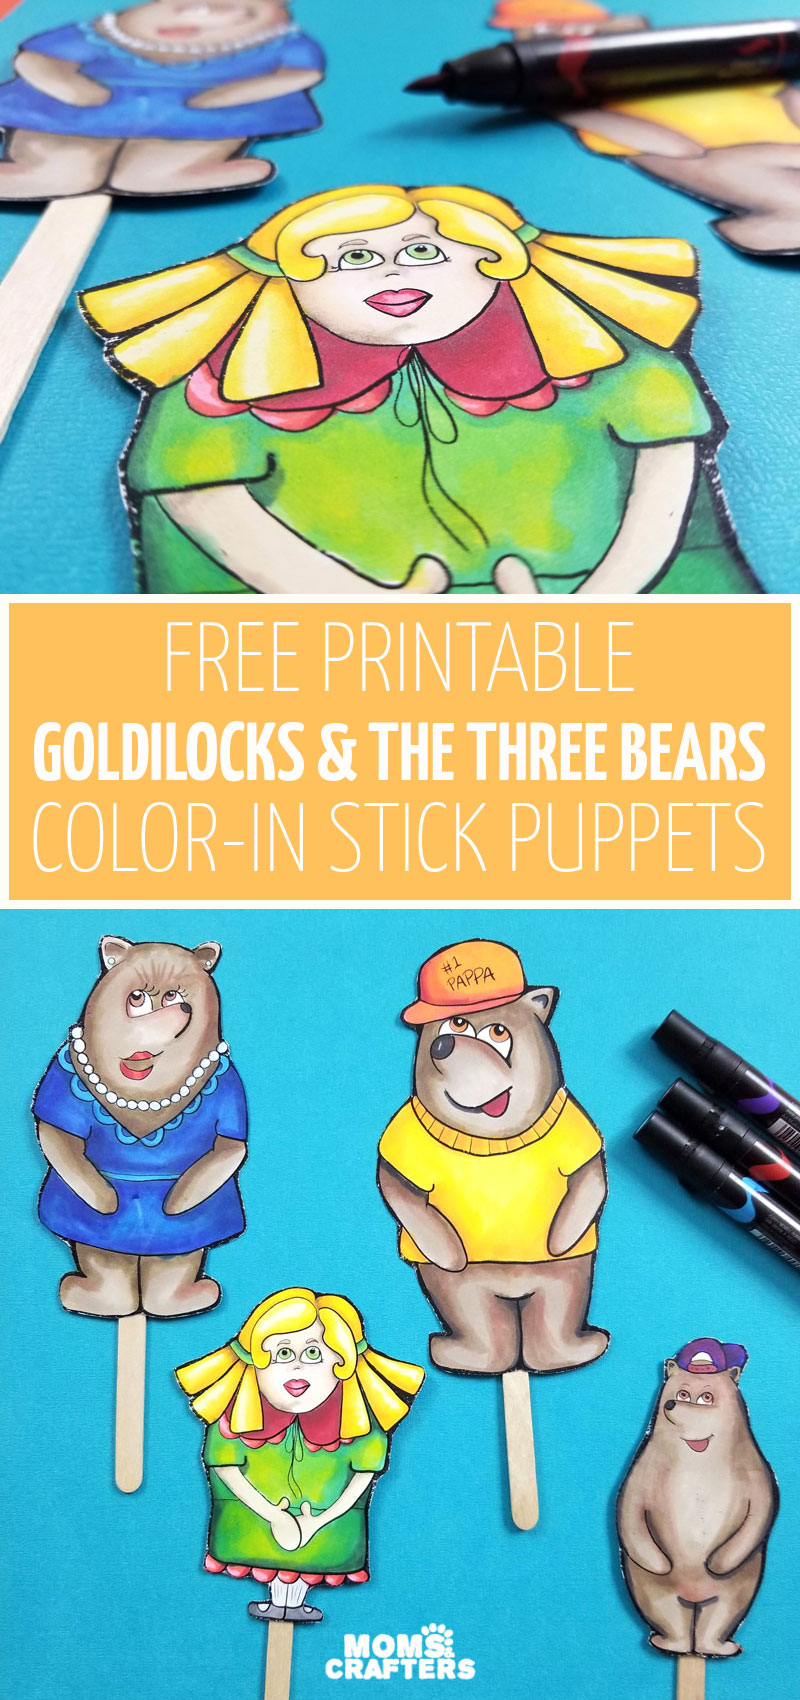 Click to download these adorable Goldilocks and the Three Bears printable puppets and fun stick puppets craft and coloring pages for kids! This fun storytelling and literacy activity is a fun DIY paper toy too.